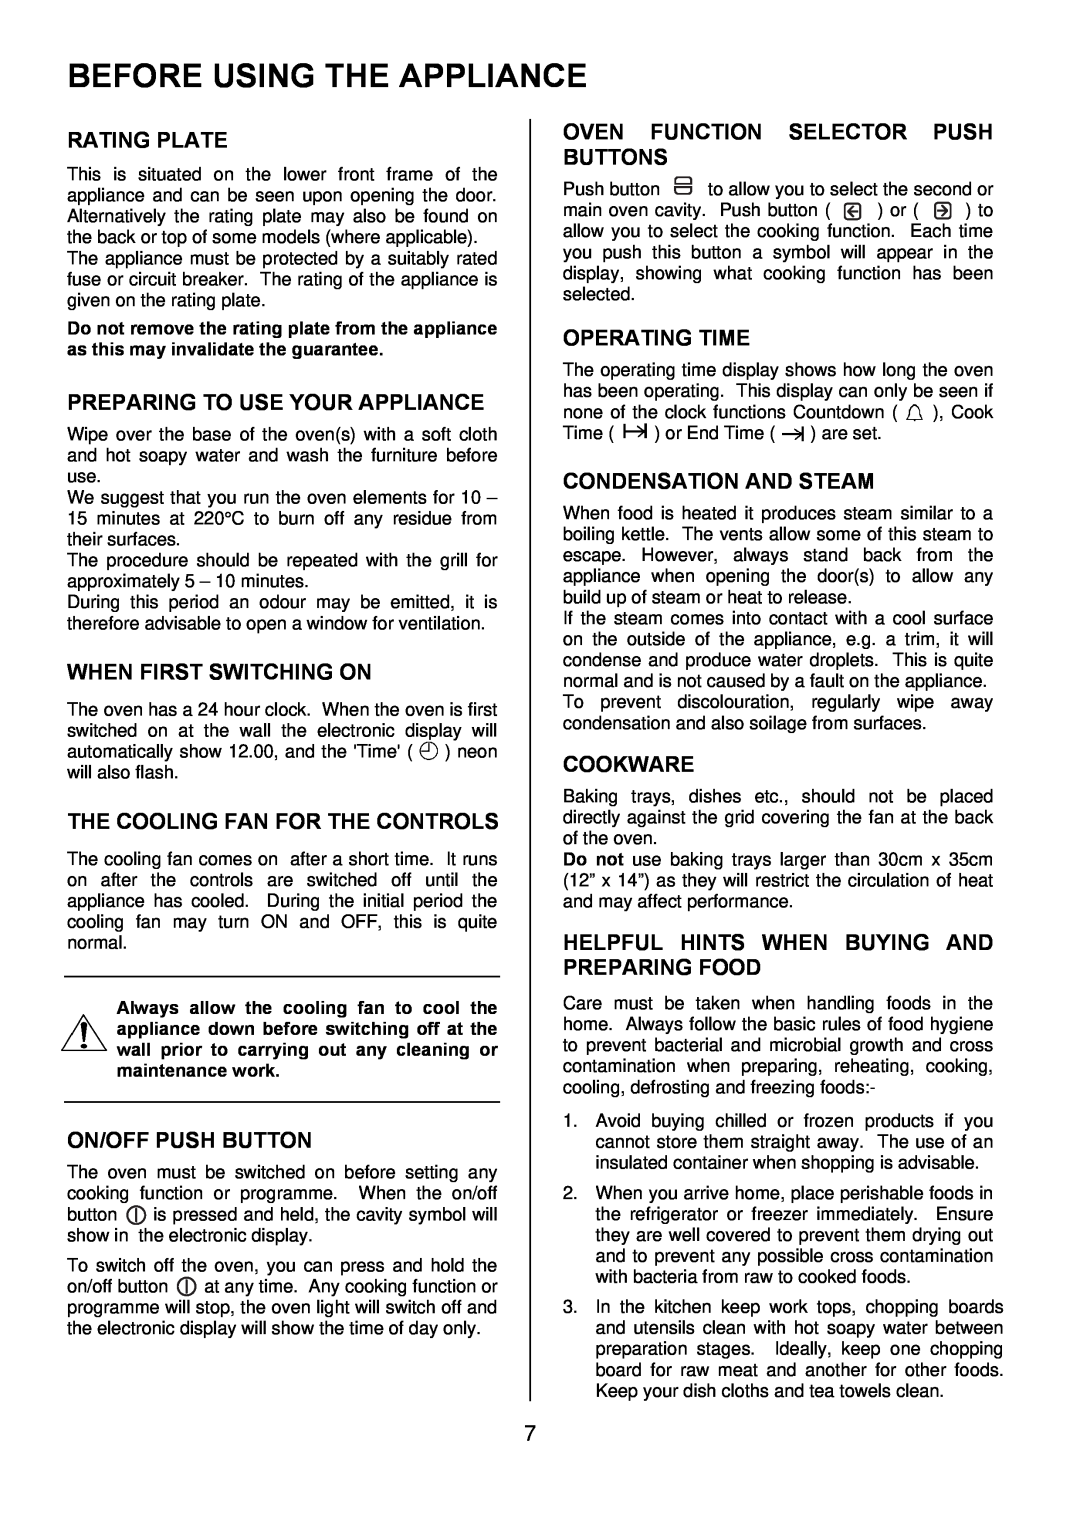 Zanussi ZDQ 995 manual Before Using The Appliance, Rating Plate, Preparing To Use Your Appliance, When First Switching On 